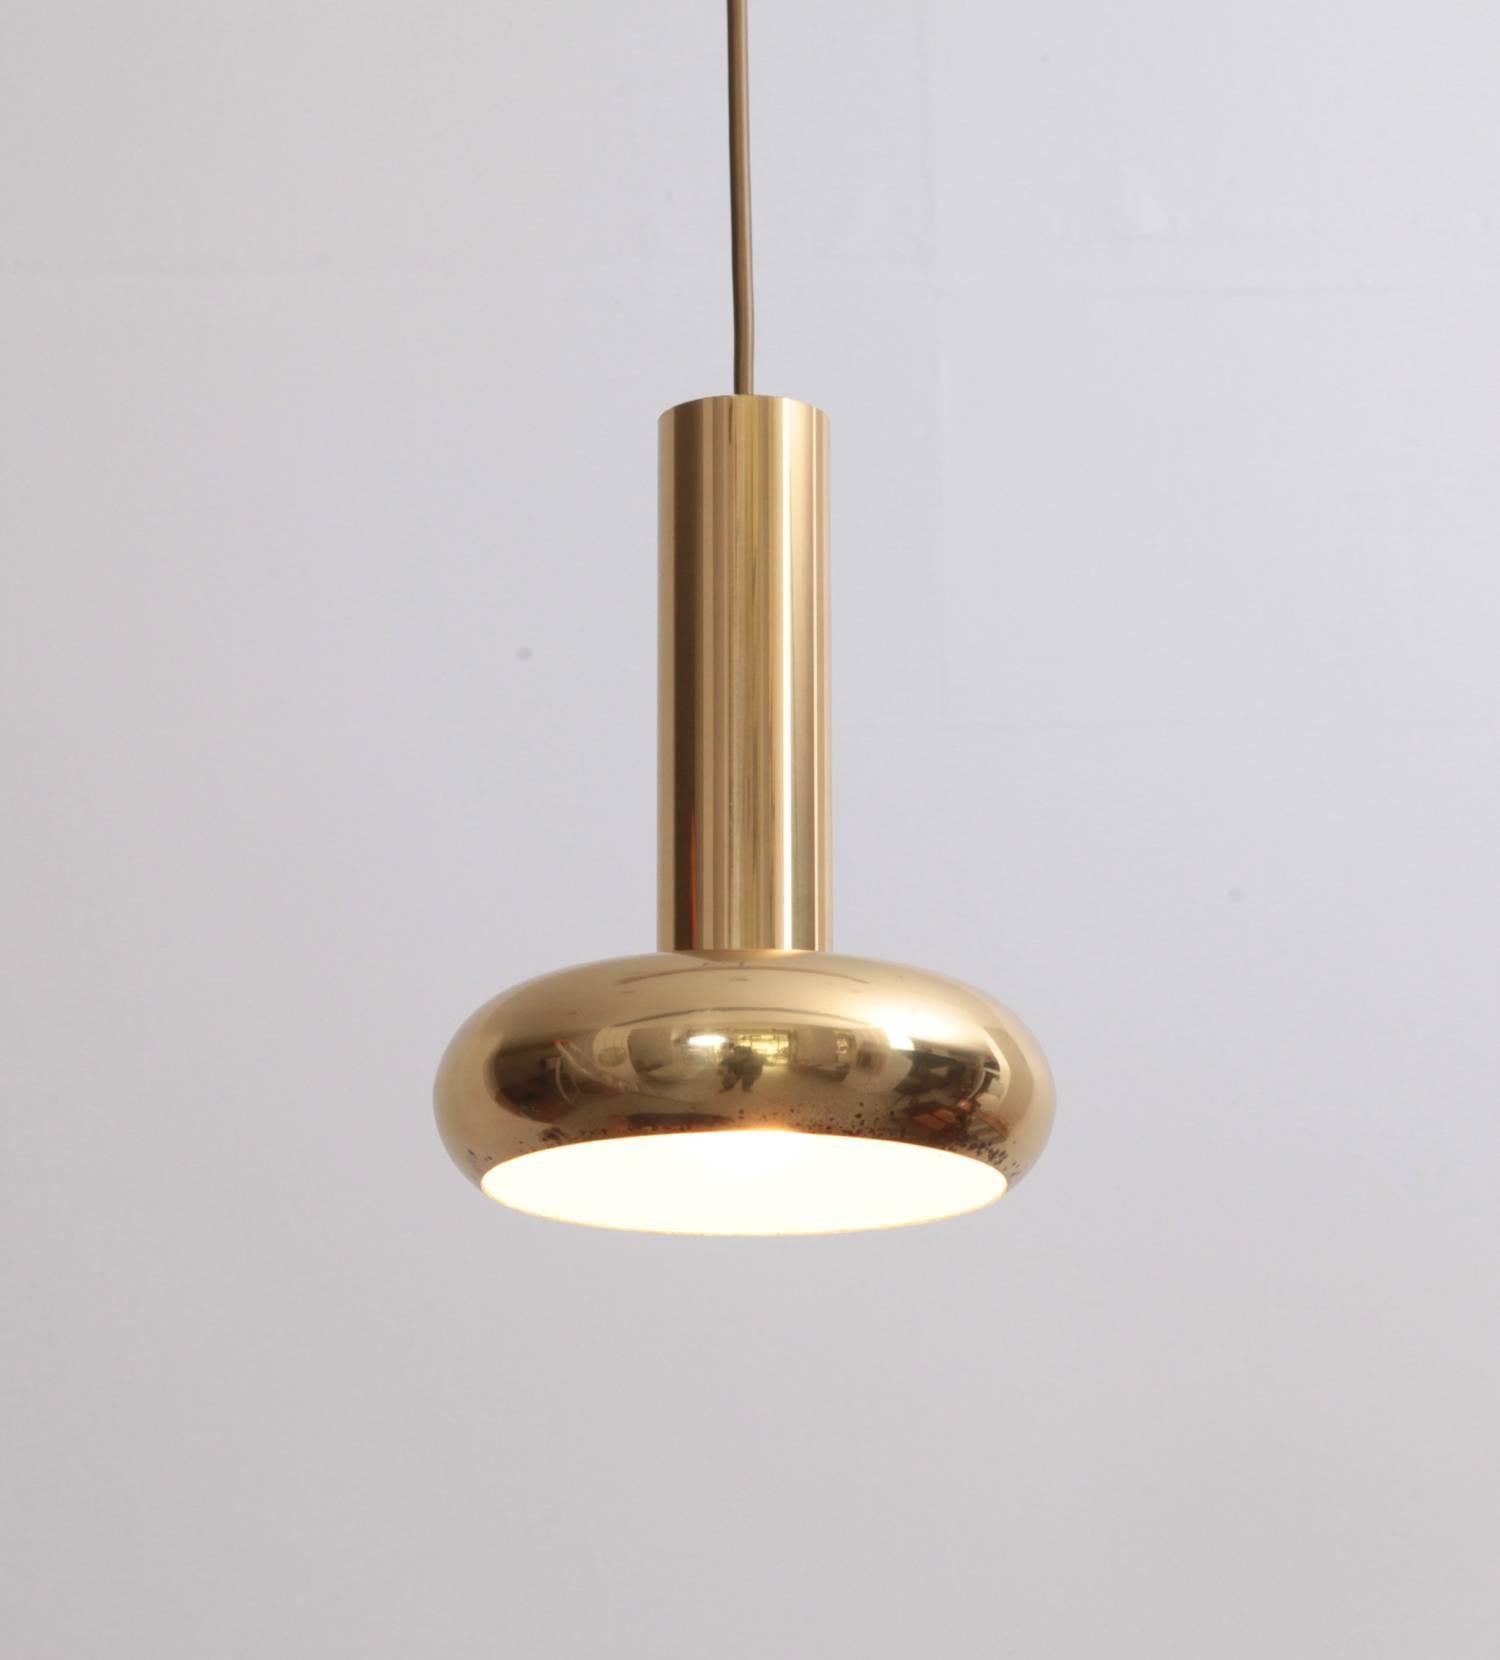 Danish modern pendant lamp with 1 x E27 /model A fitting.
No dents!
To be on the the safe side, the lamp should be checked locally by a specialist concerning local requirements. This is our last piece!
